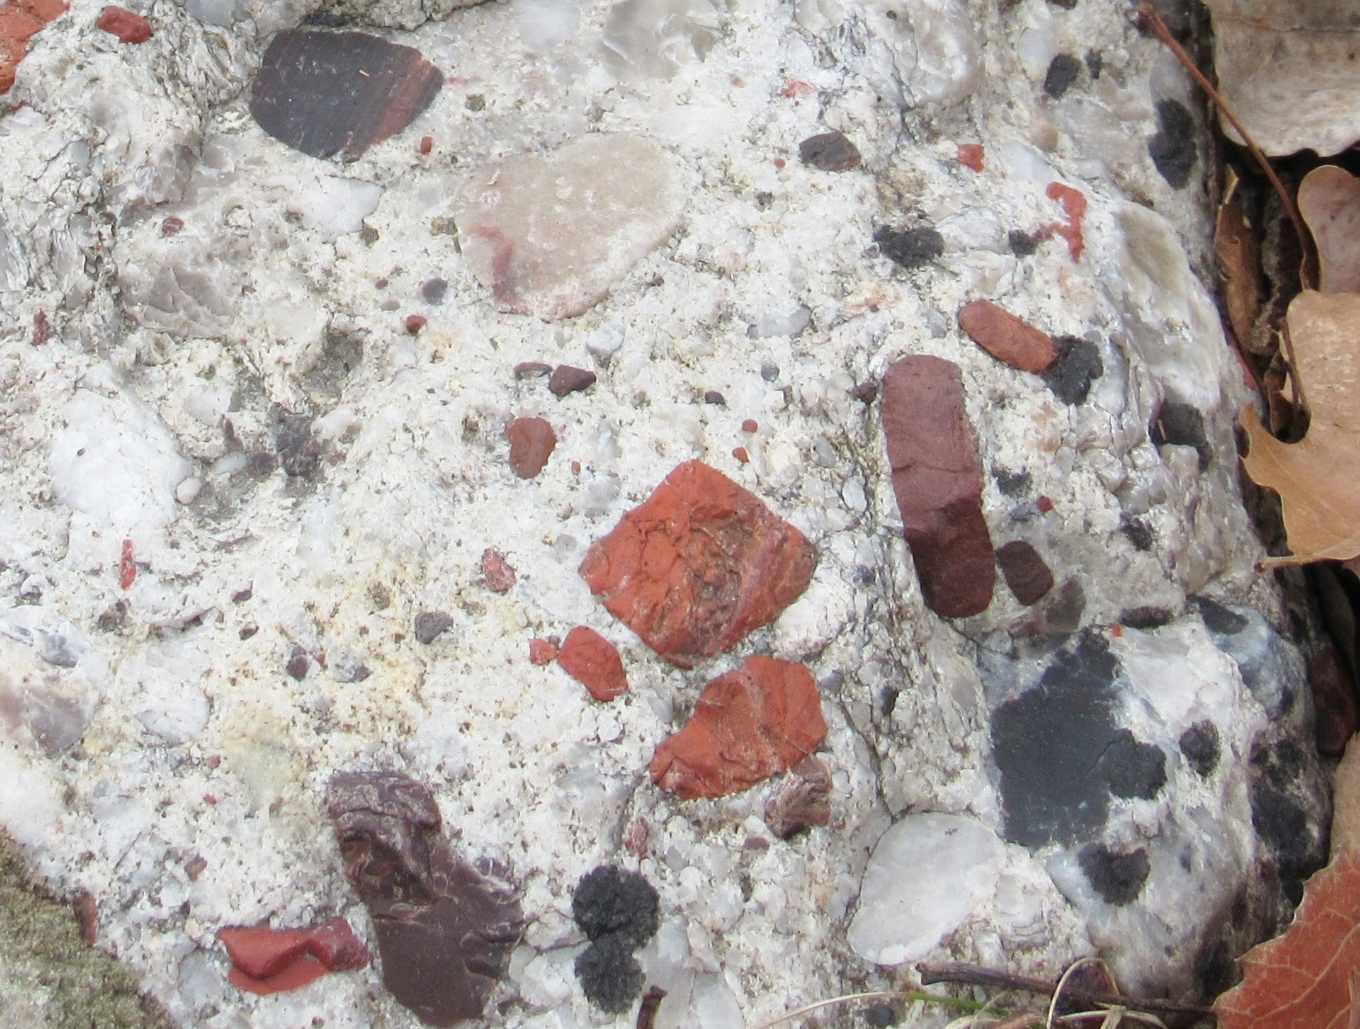 Close up image of the embedded minerals in the same pudding stone.